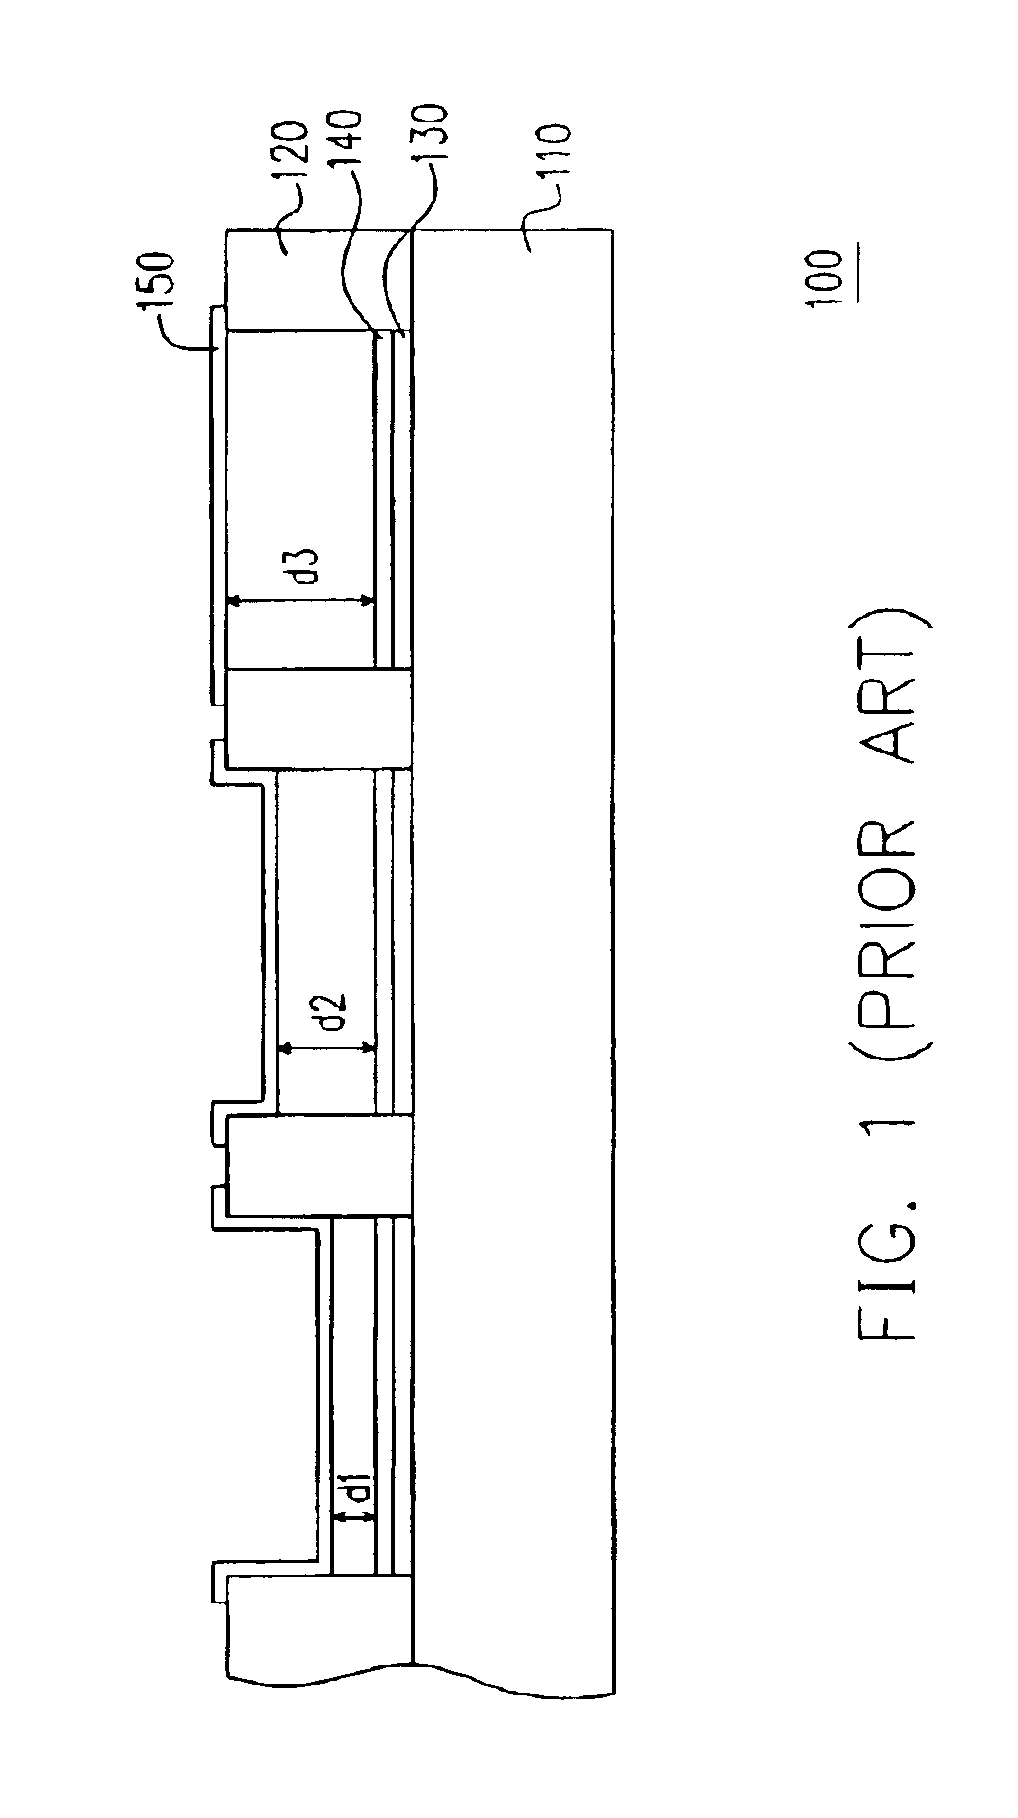 Optical interference color display and optical interference modulator